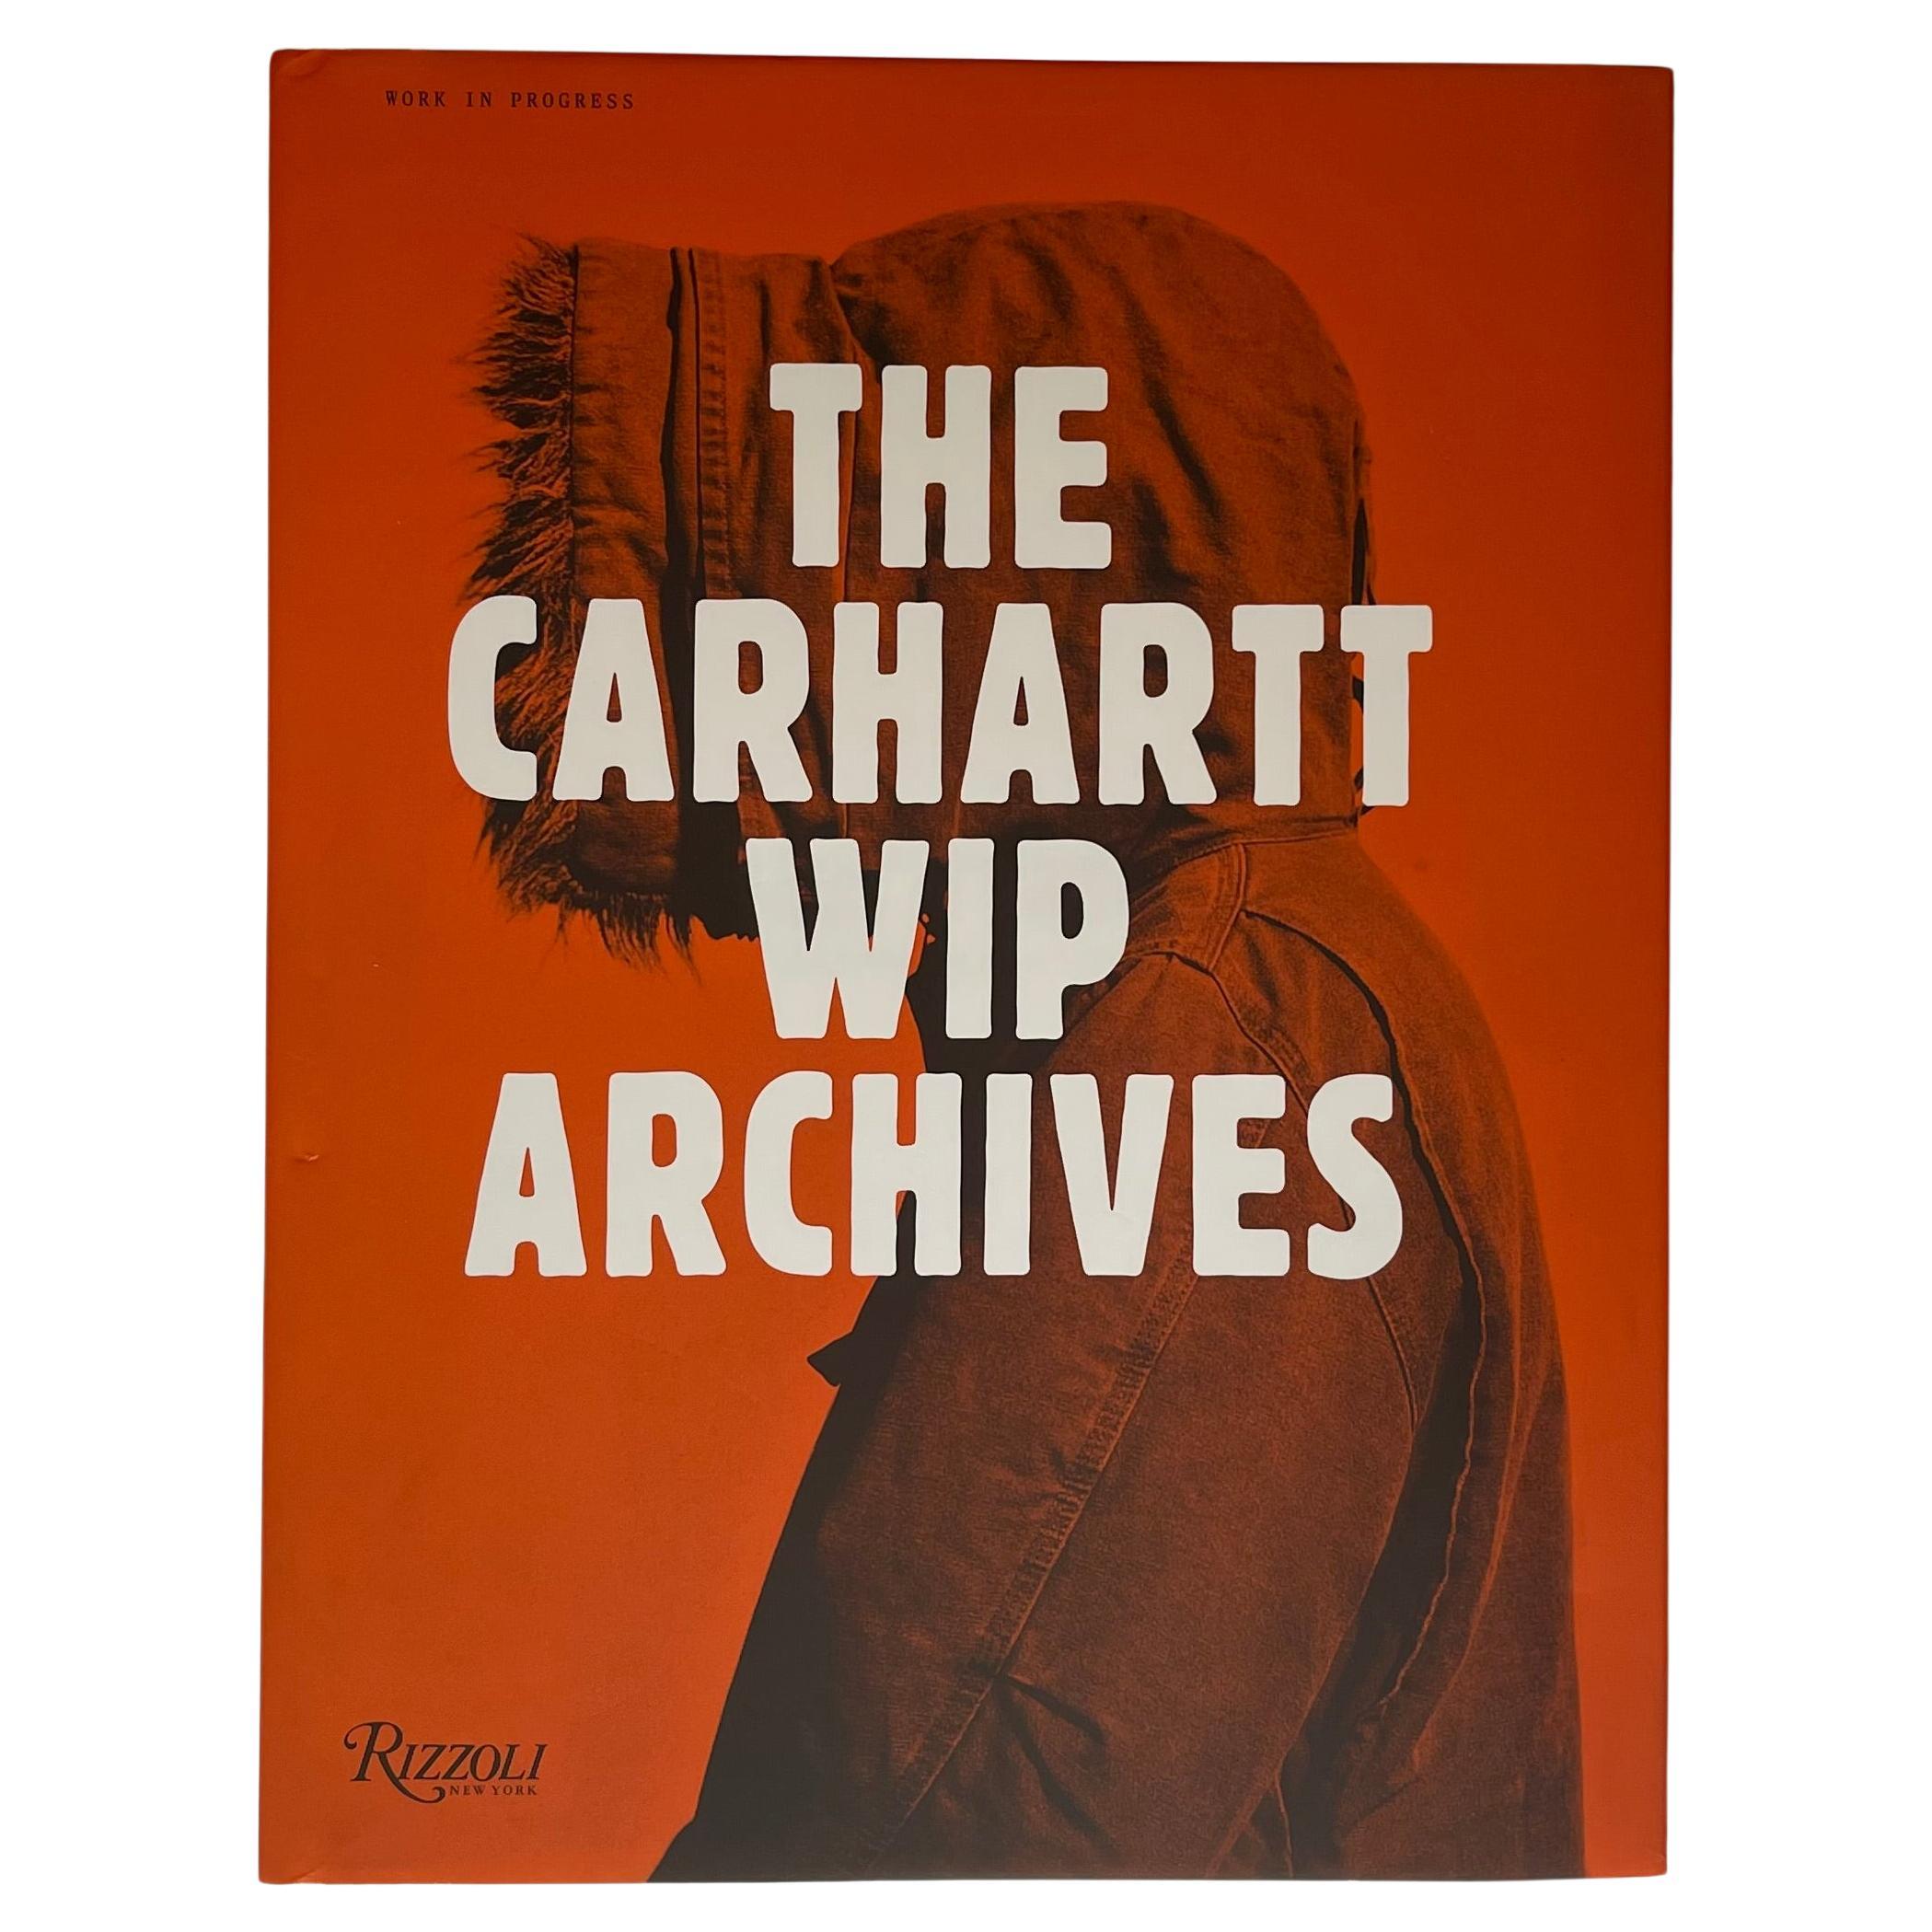 The Carhartt WIP Archives Published by Rizzoli